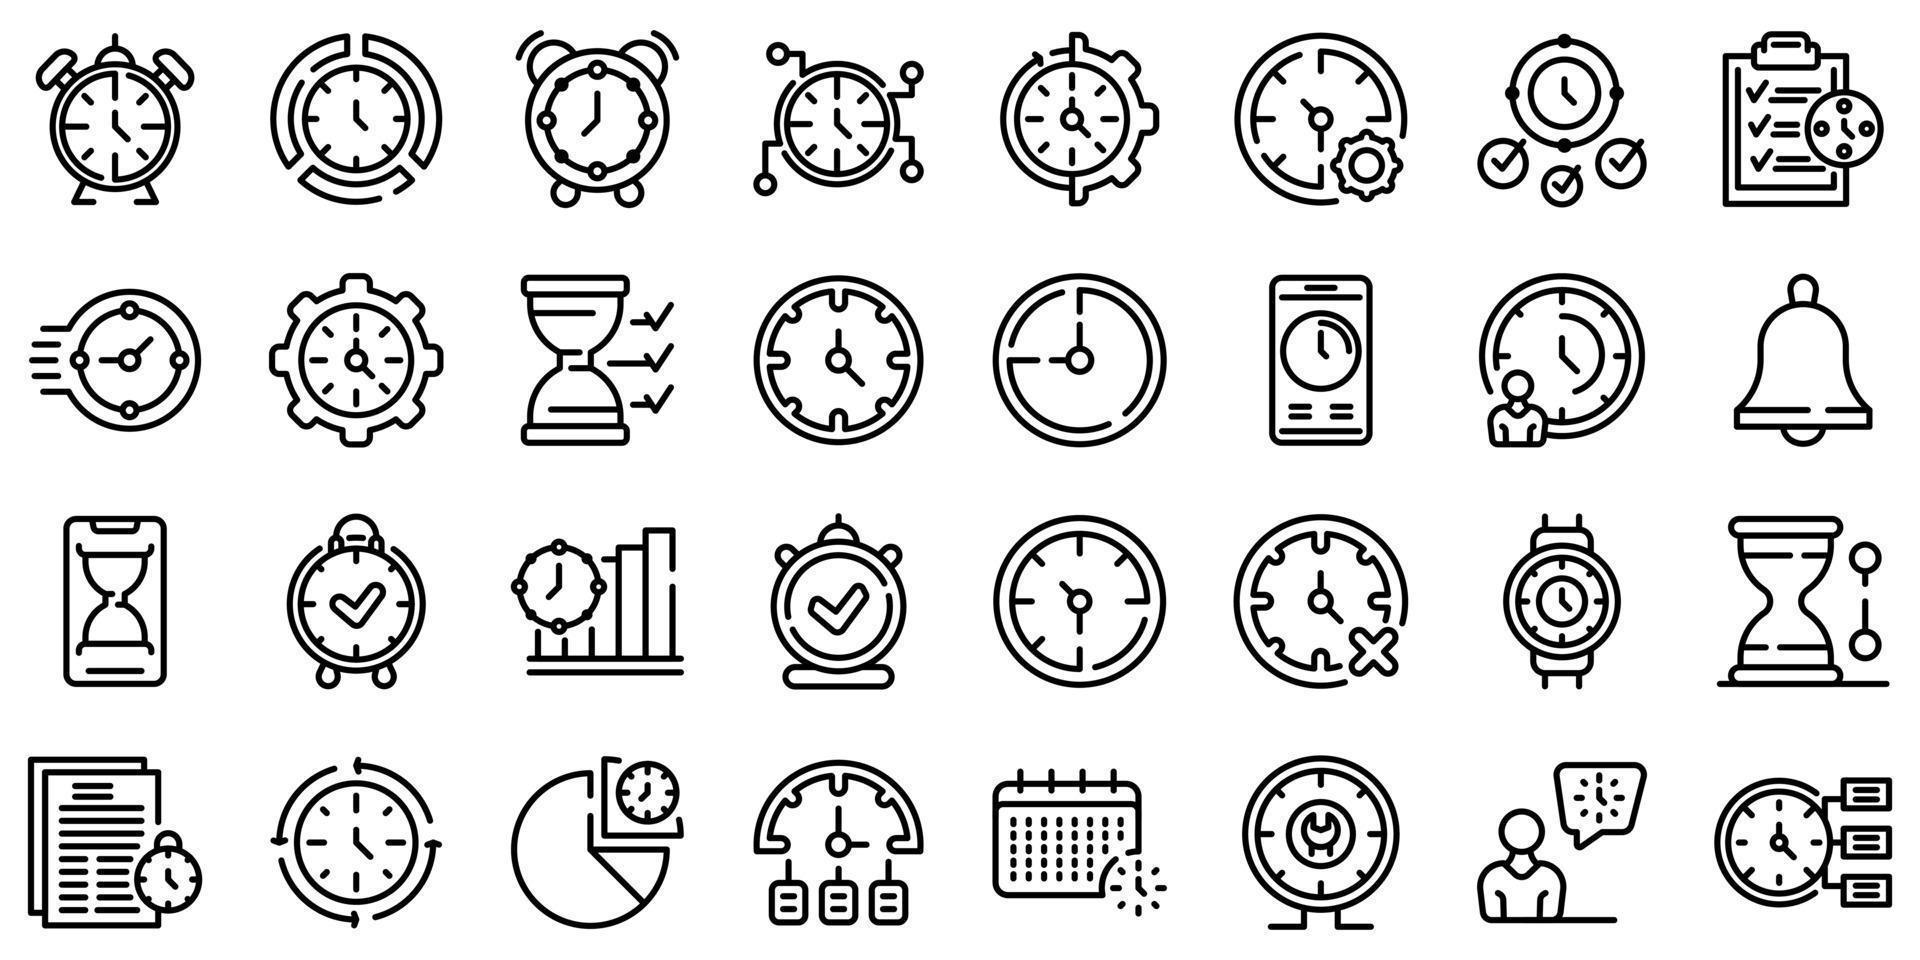 Time management icons set, outline style vector